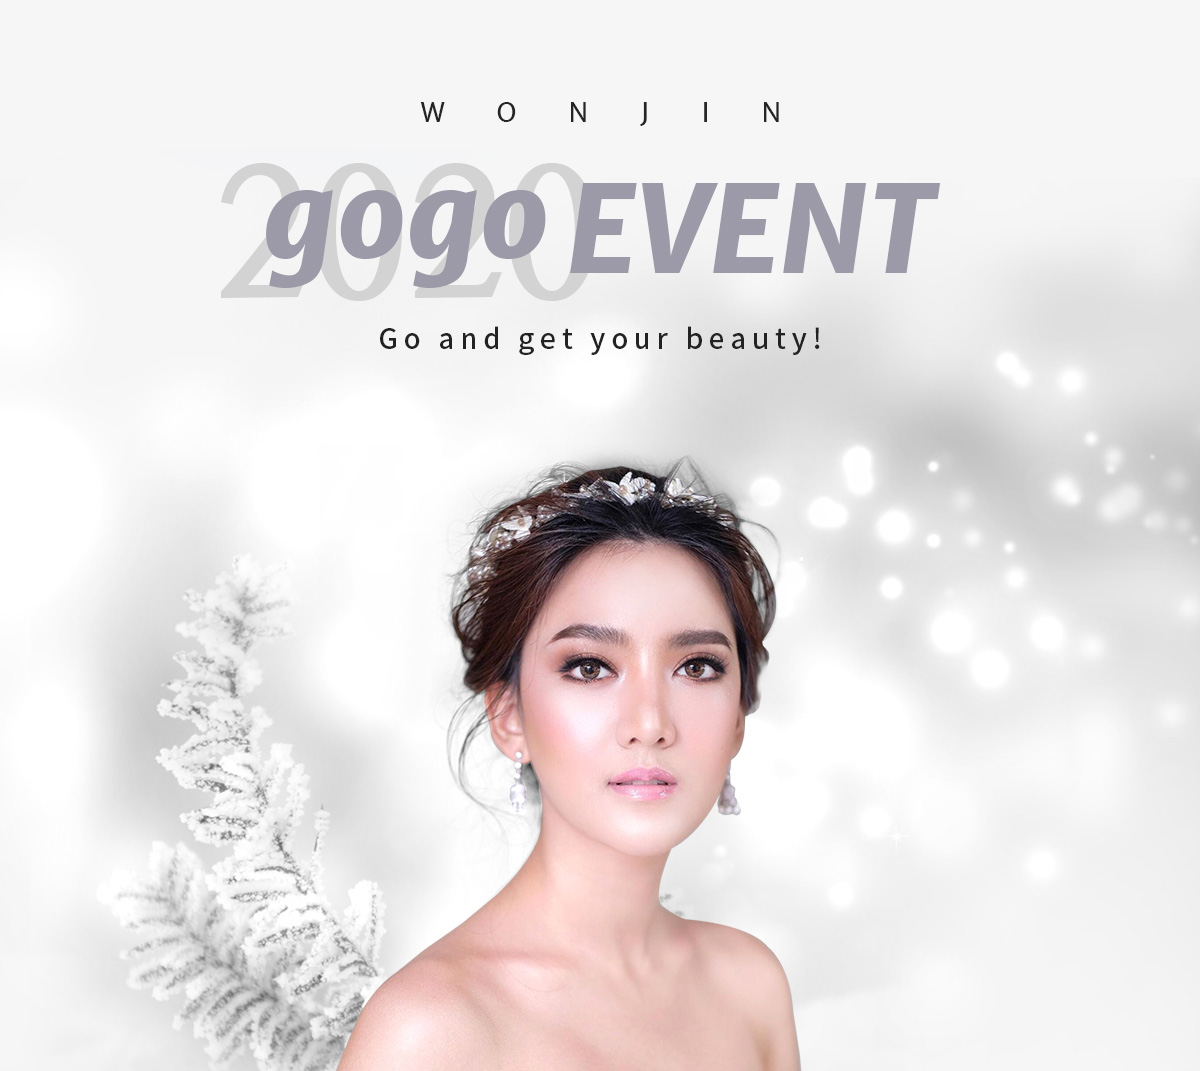 Wonjins 2020 gogo event Go and get your beauty!